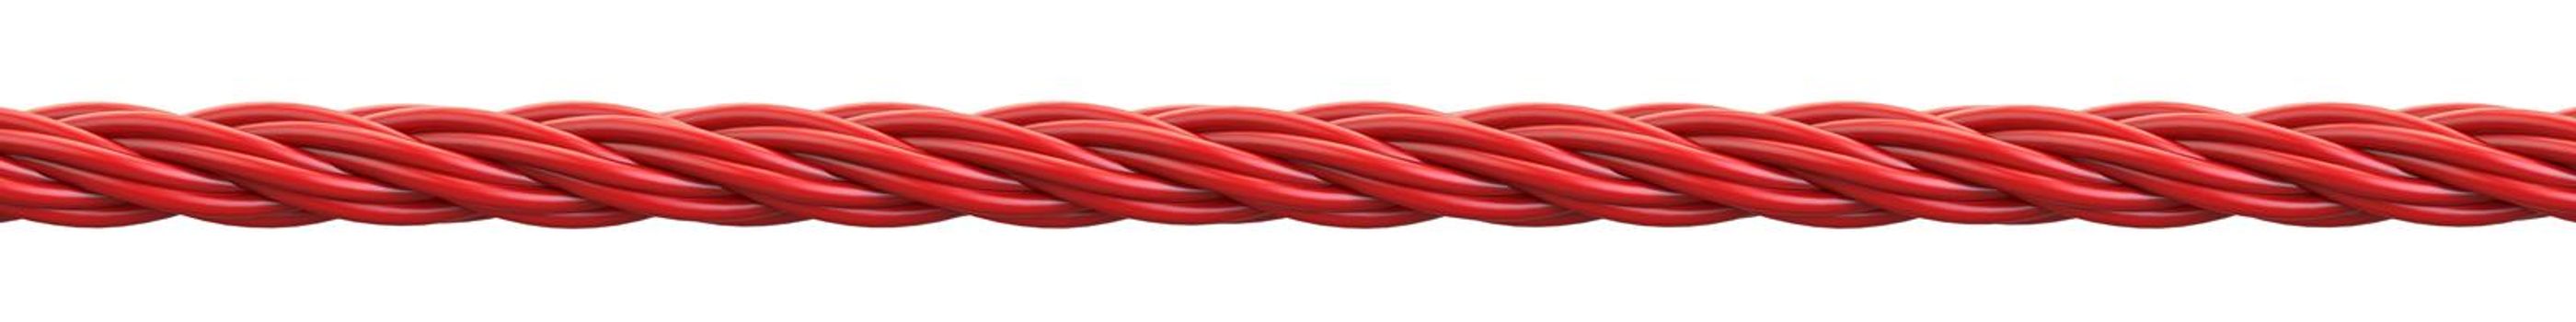 Red rope 3D render illustration isolated on white background